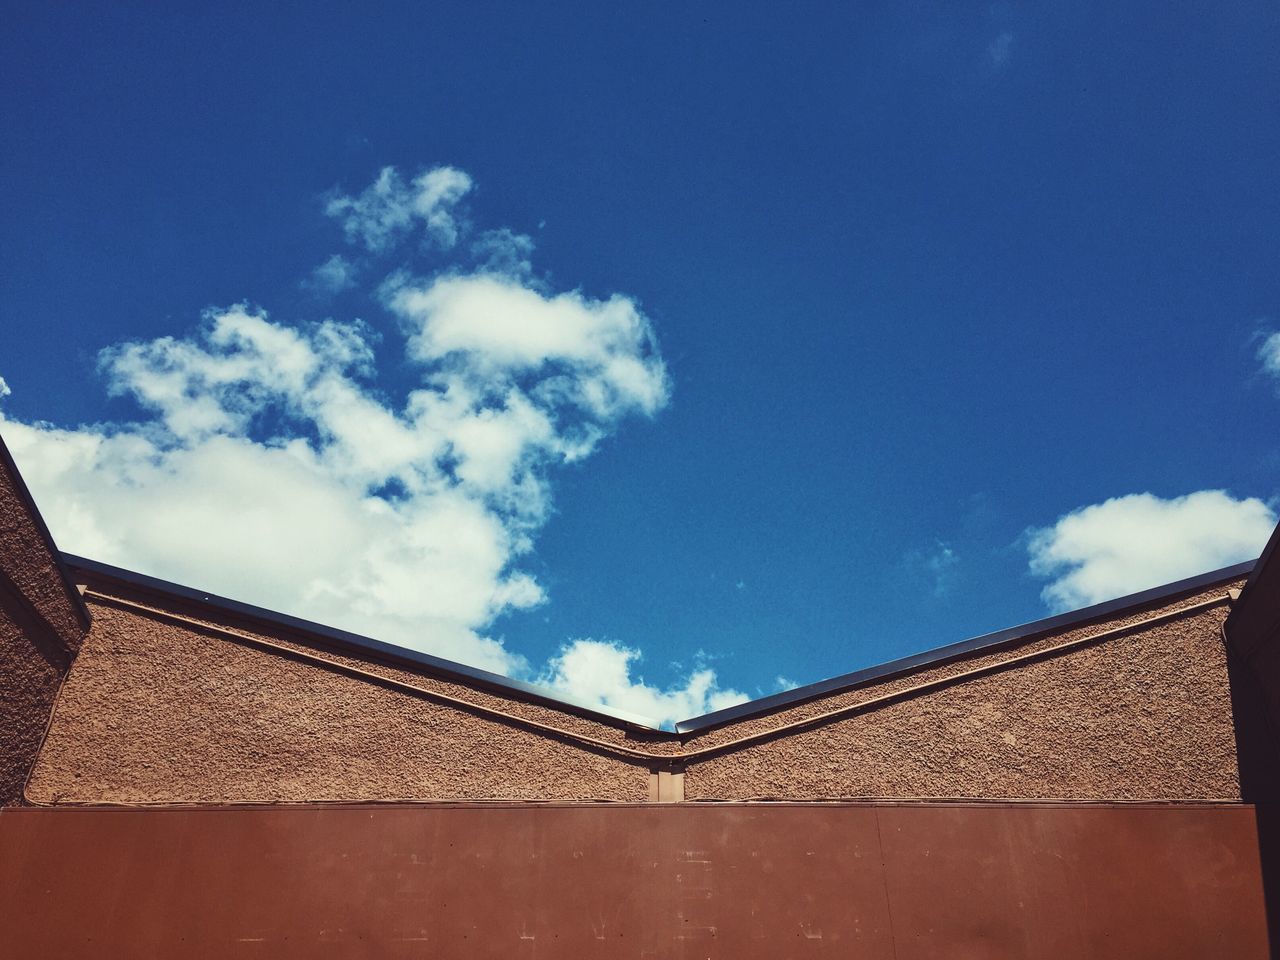 LOW ANGLE VIEW OF HOUSE AGAINST BLUE SKY